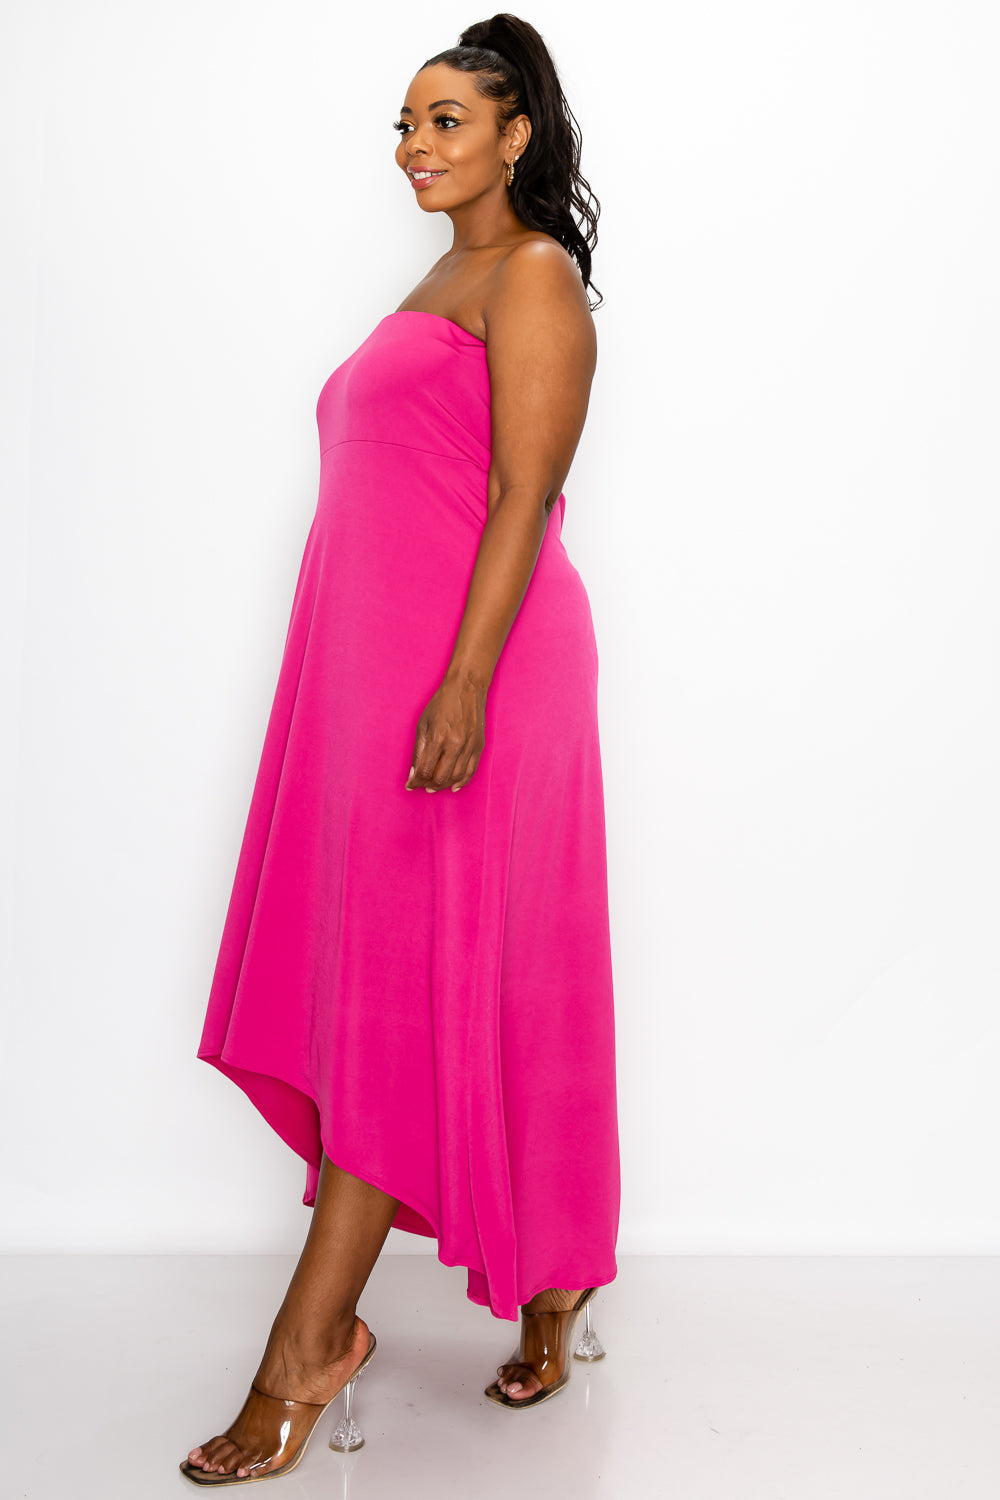 livd plus size boutique strapless high low dress in fuchsia